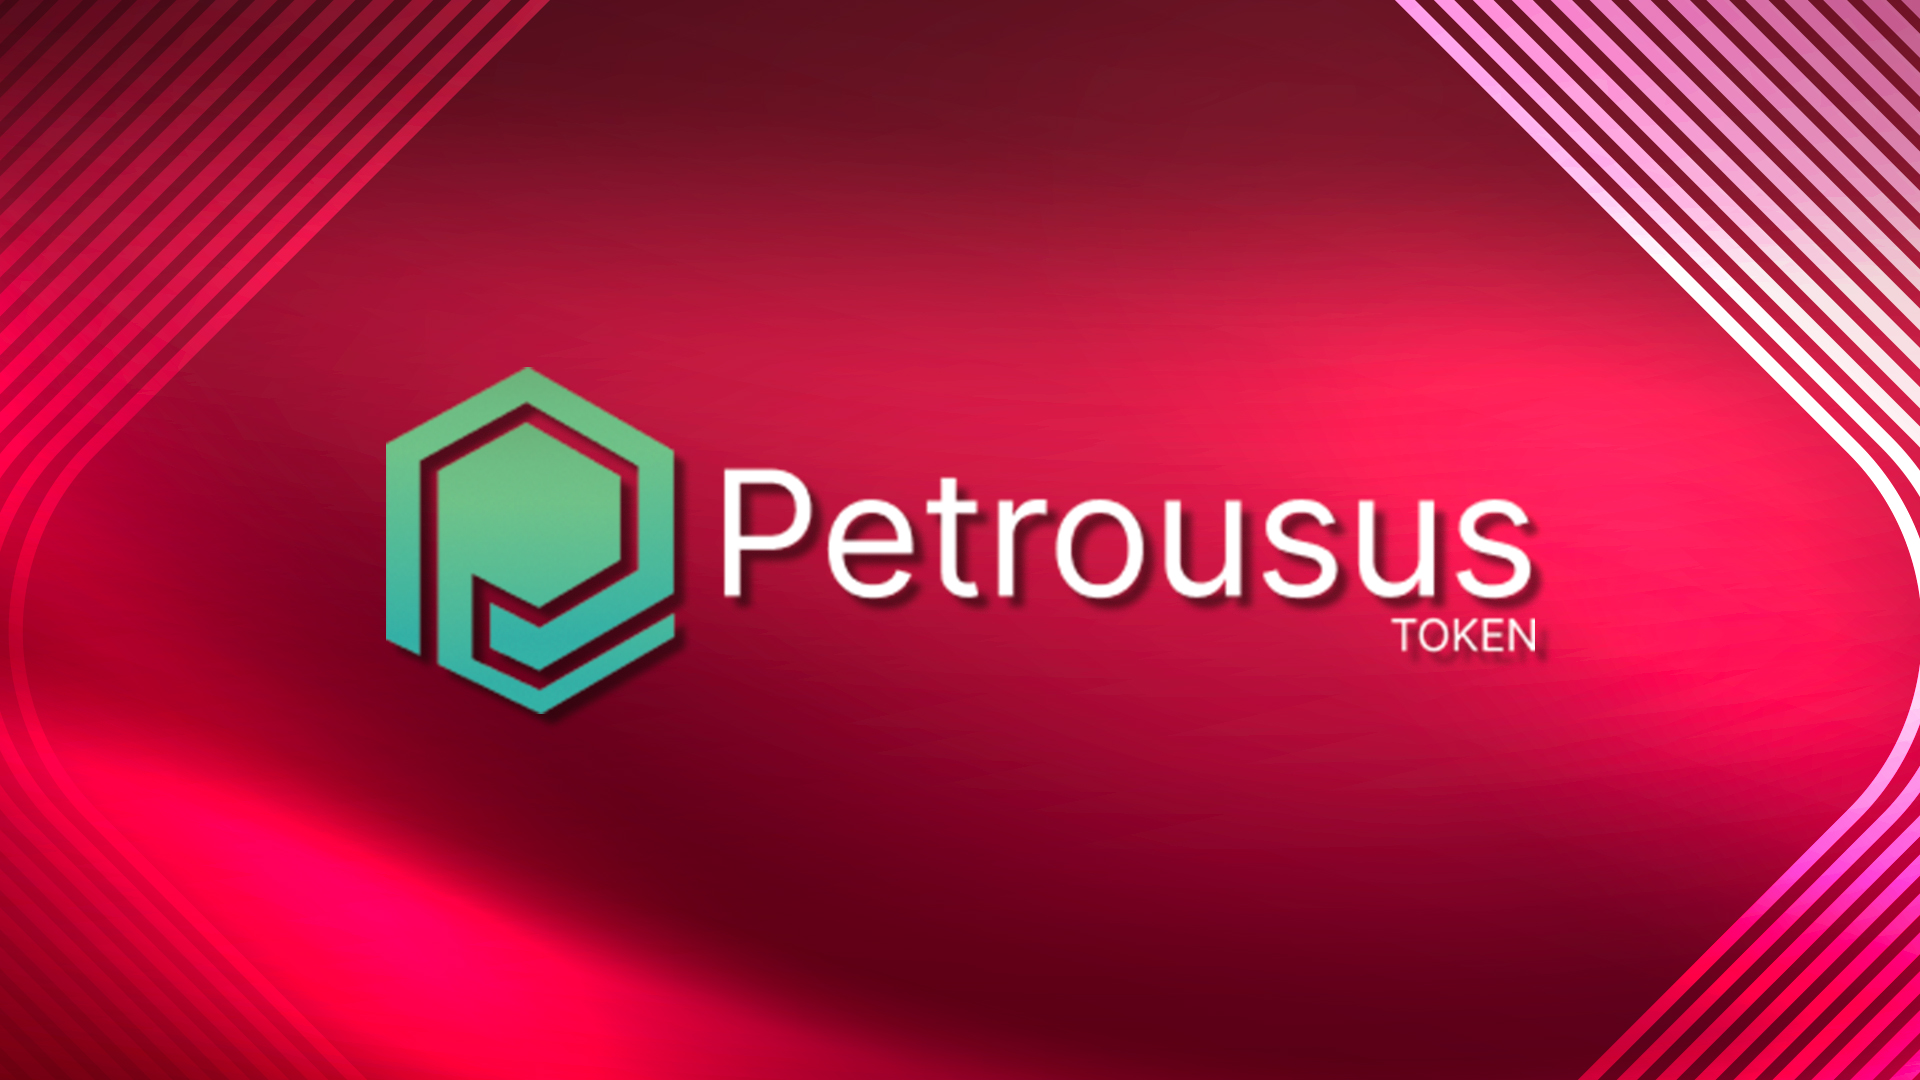 Waste no time and get the new Petrousus Token (PSUS) now, crypto of the likes of Solana (SOL) and Polkadot (DOT) = The Bit Journal